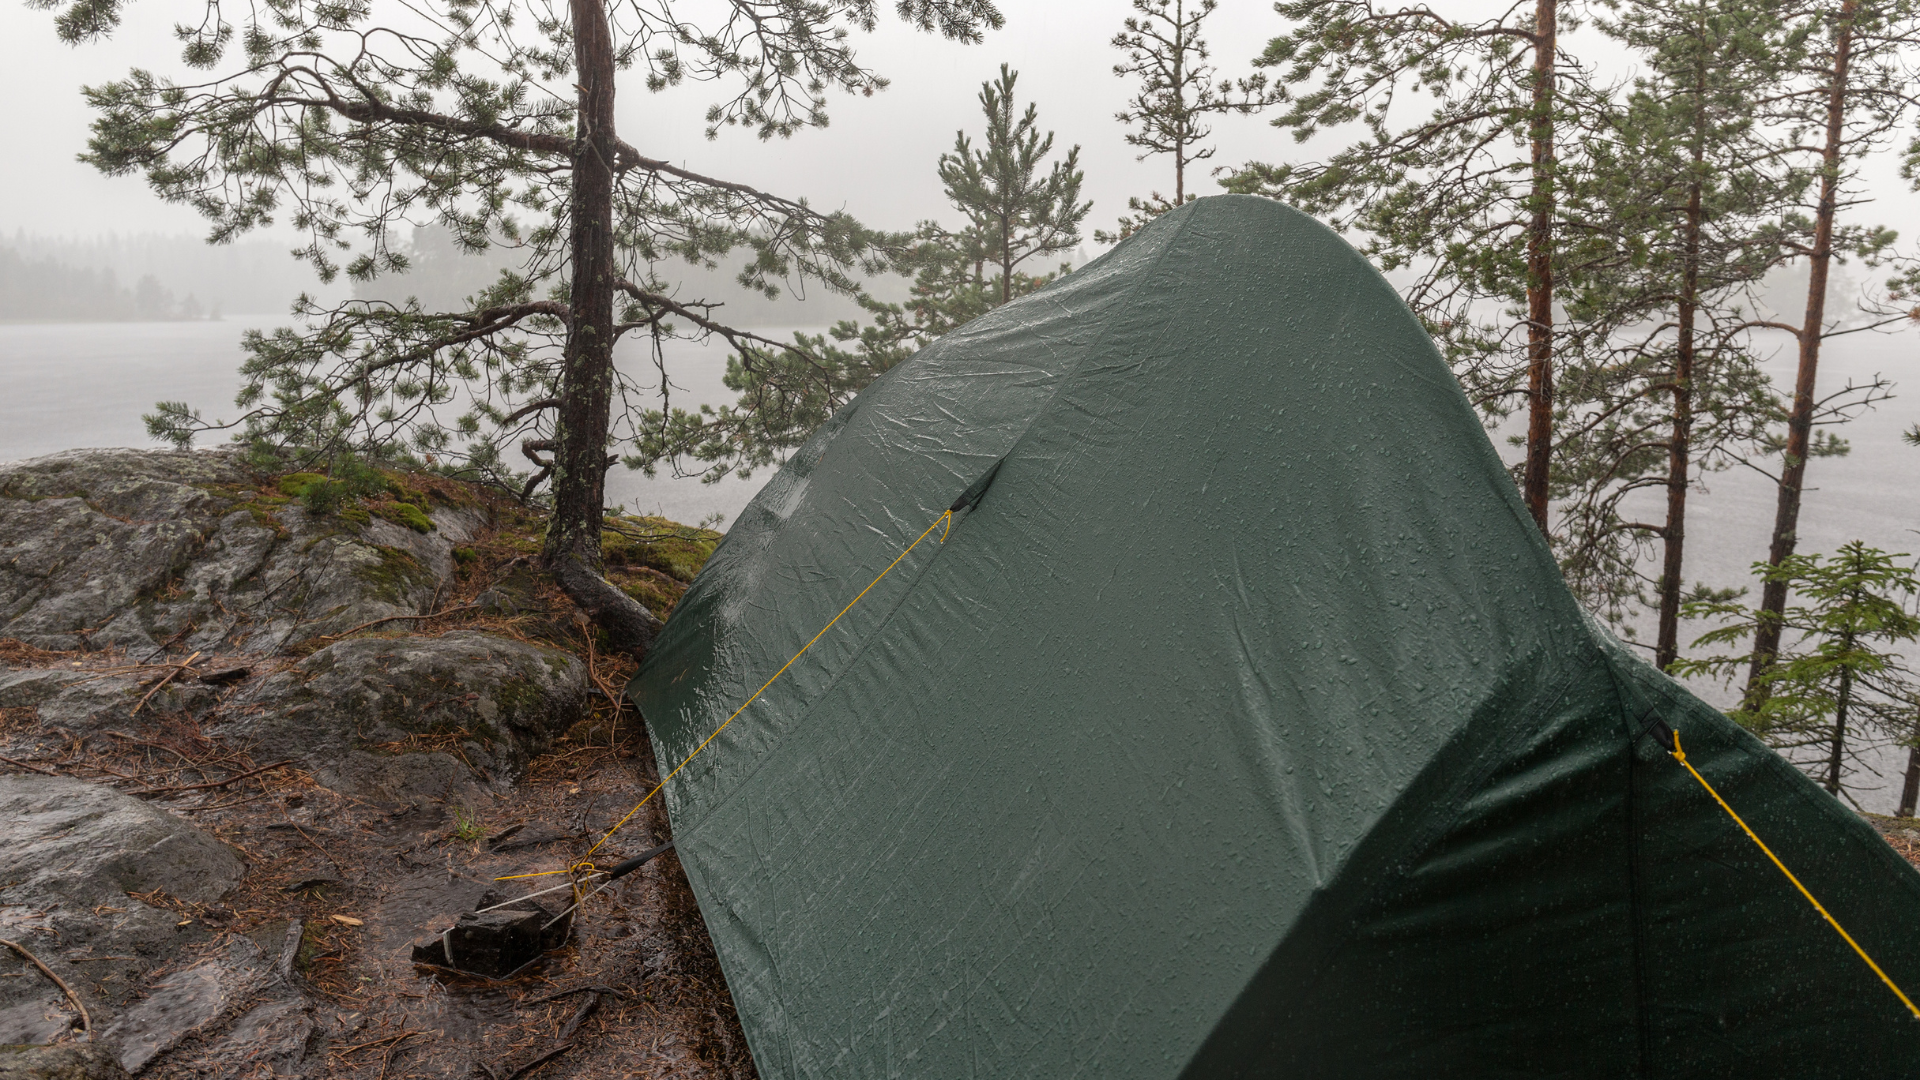 Campers using fall camping tips to waterproof tent for fall camping.